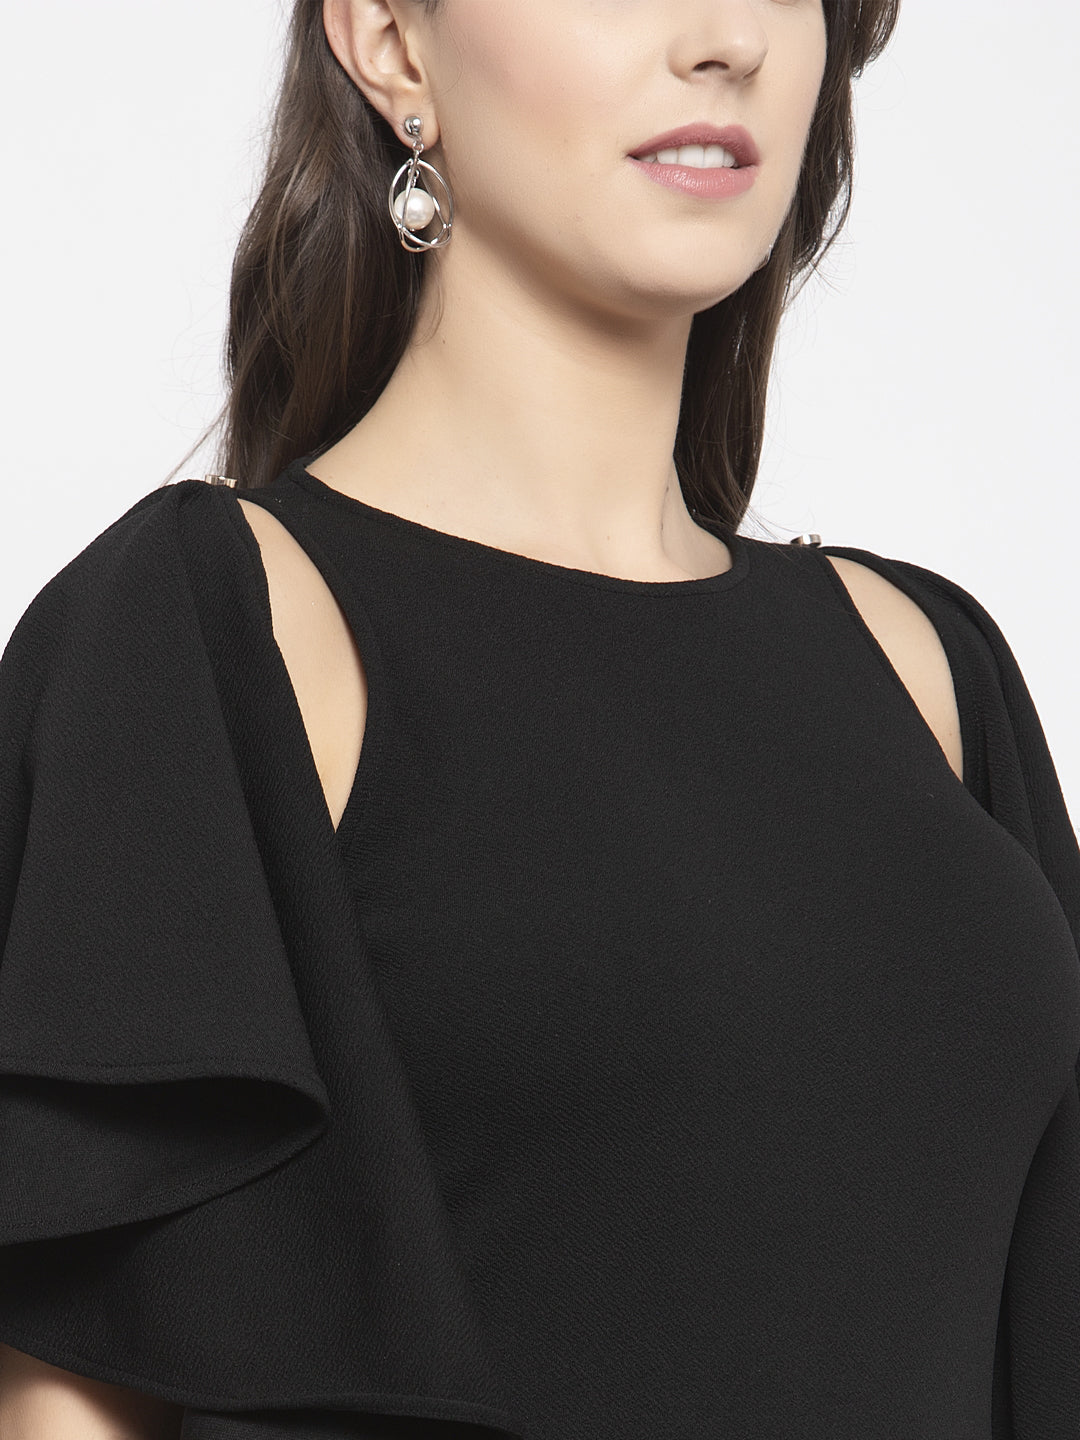 BLACK BODYCON WITH ARMCUT AND FLARE SLEEVE